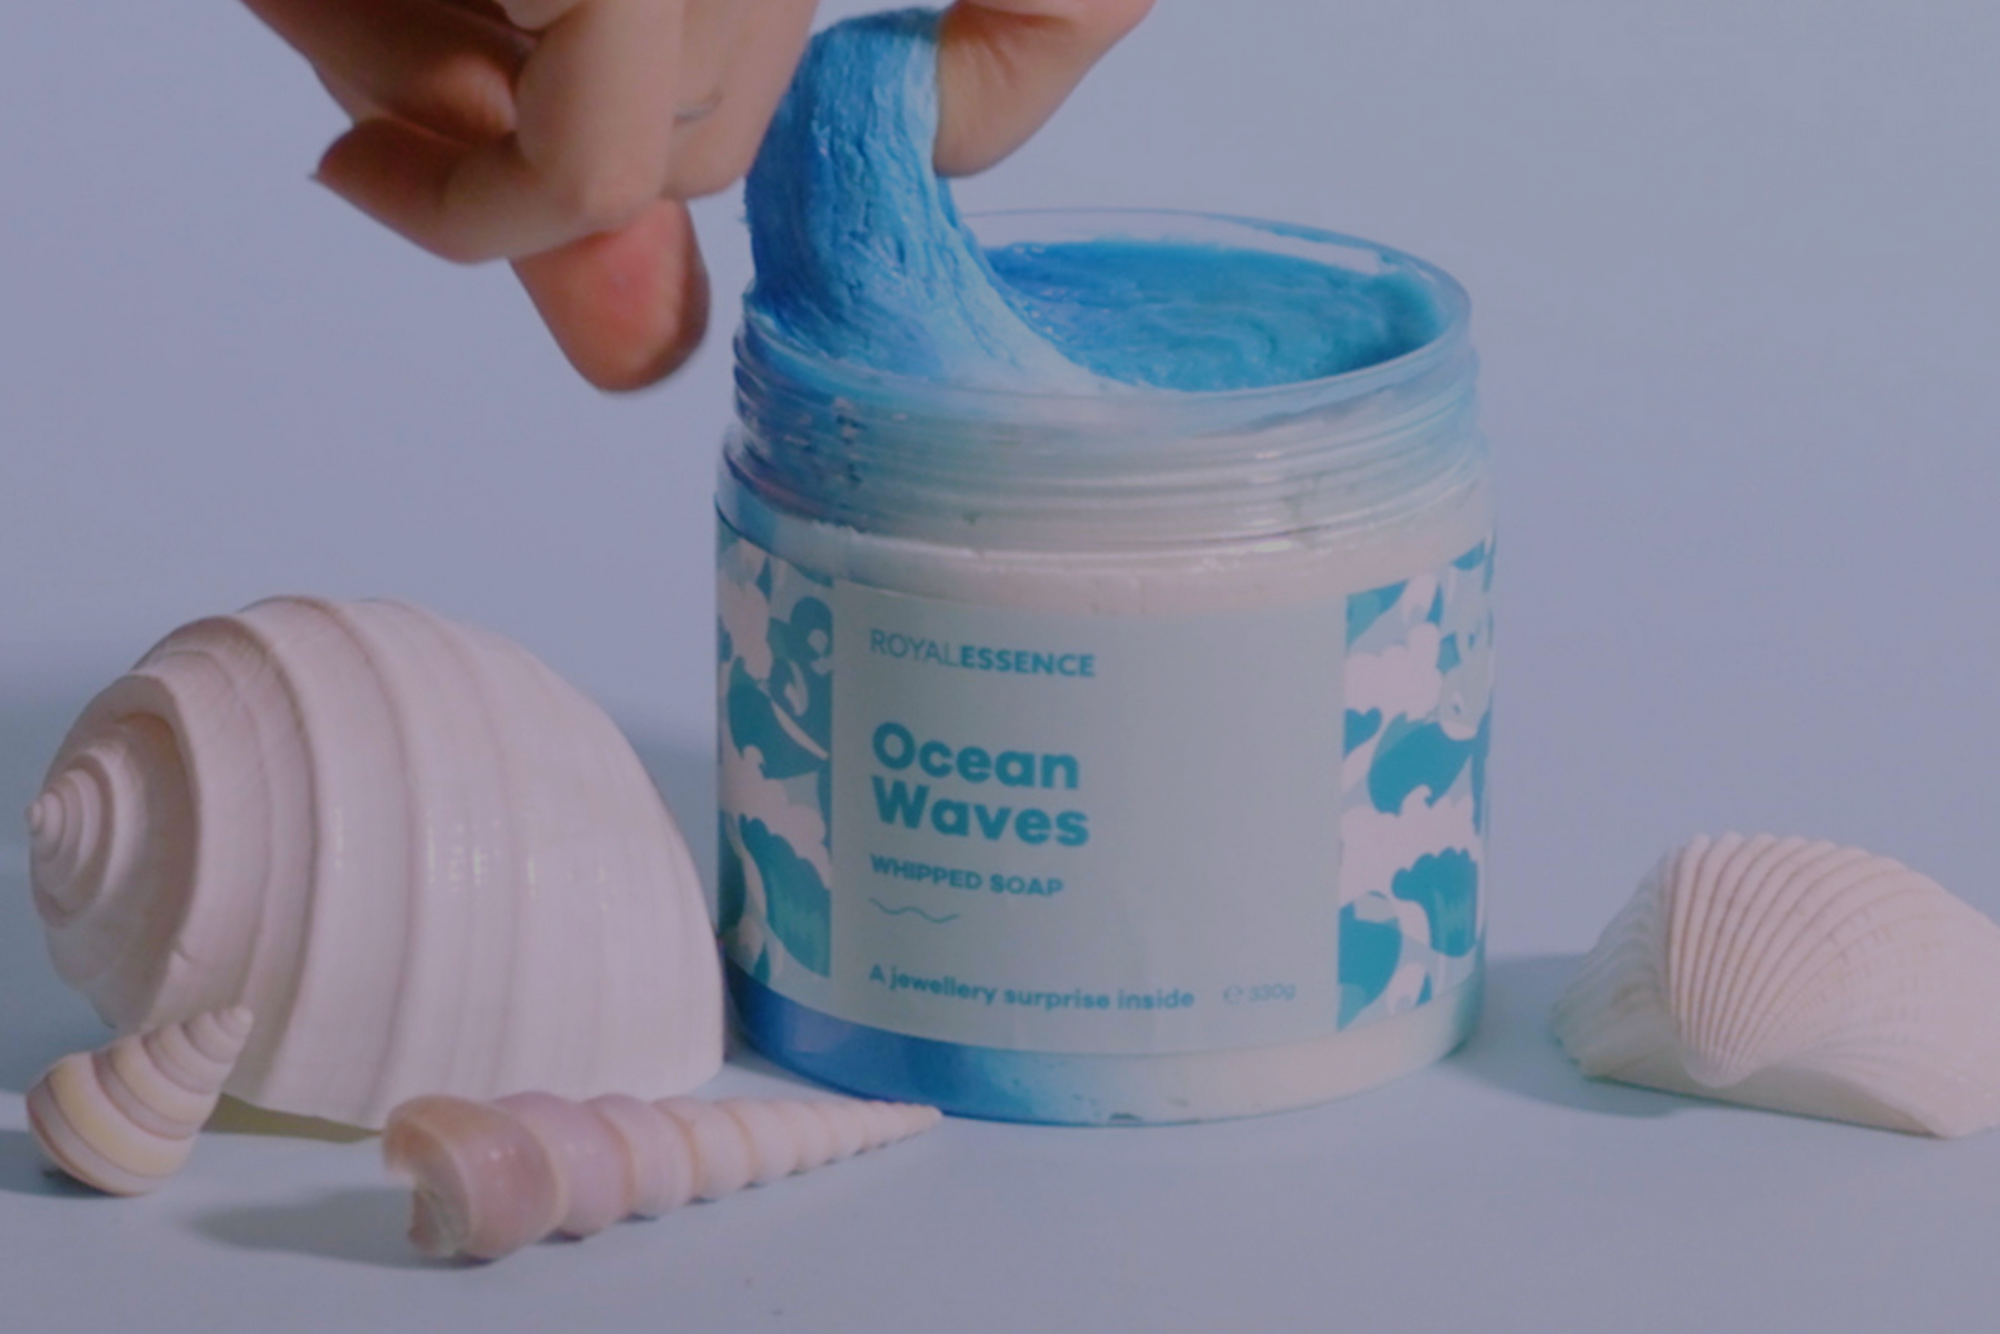 What’s a Whipped Soap and Why Should You Use It?